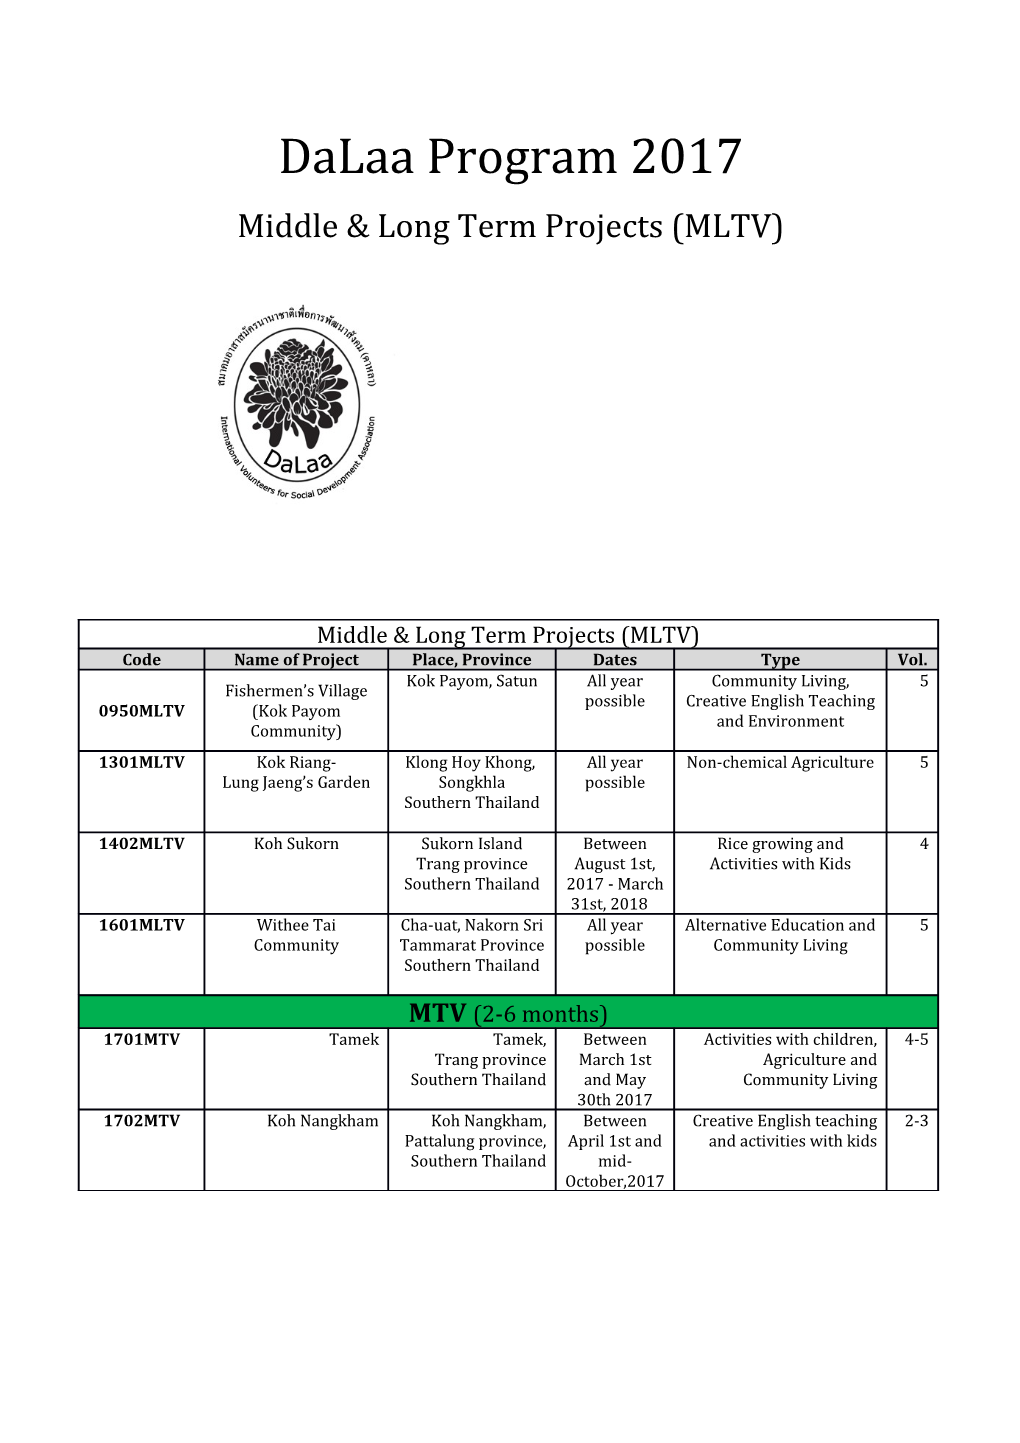 Middle & Long Term Projects (MLTV)